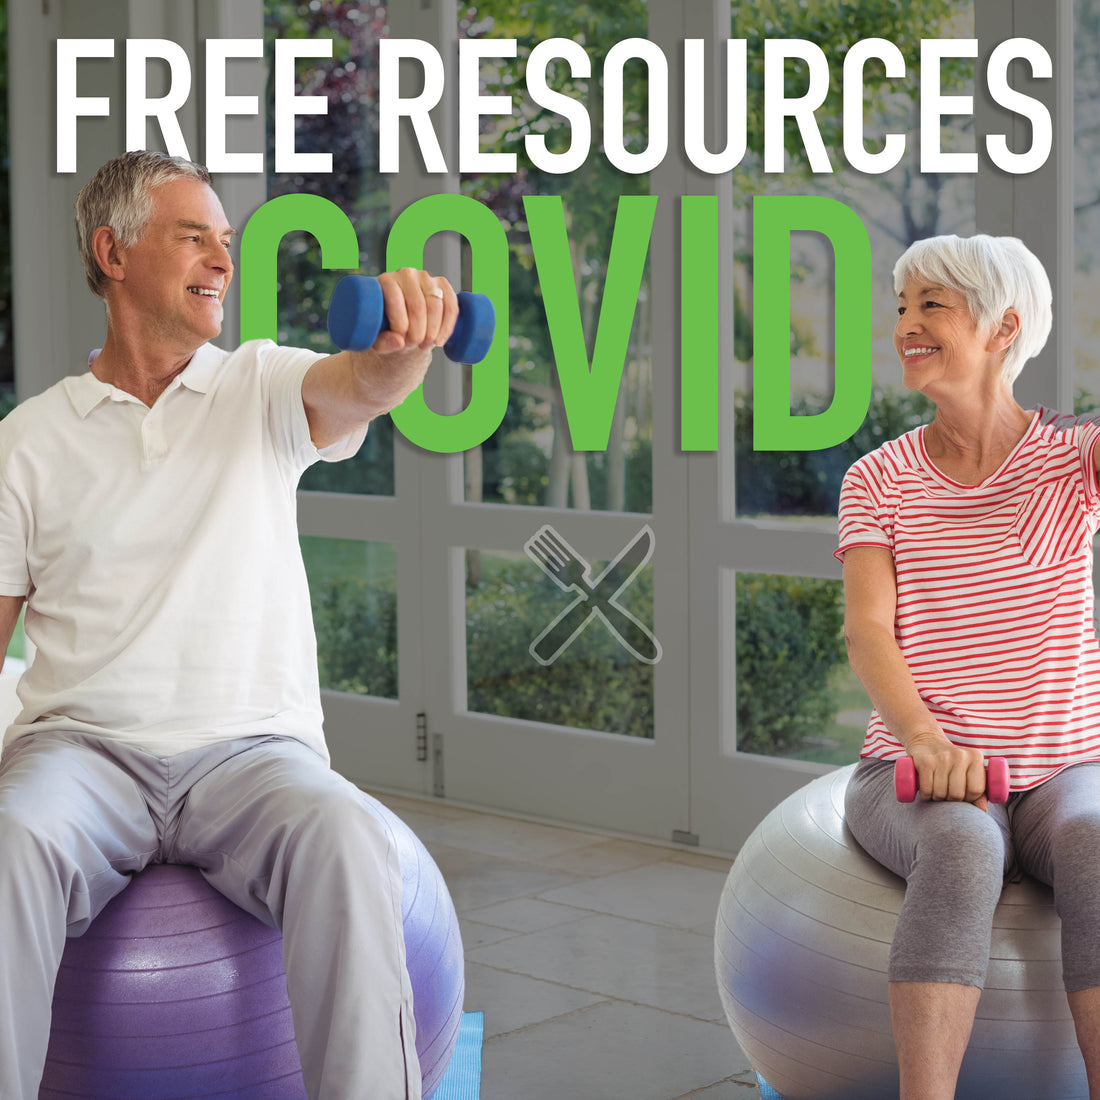 Free resources for working out at home during COVID-19